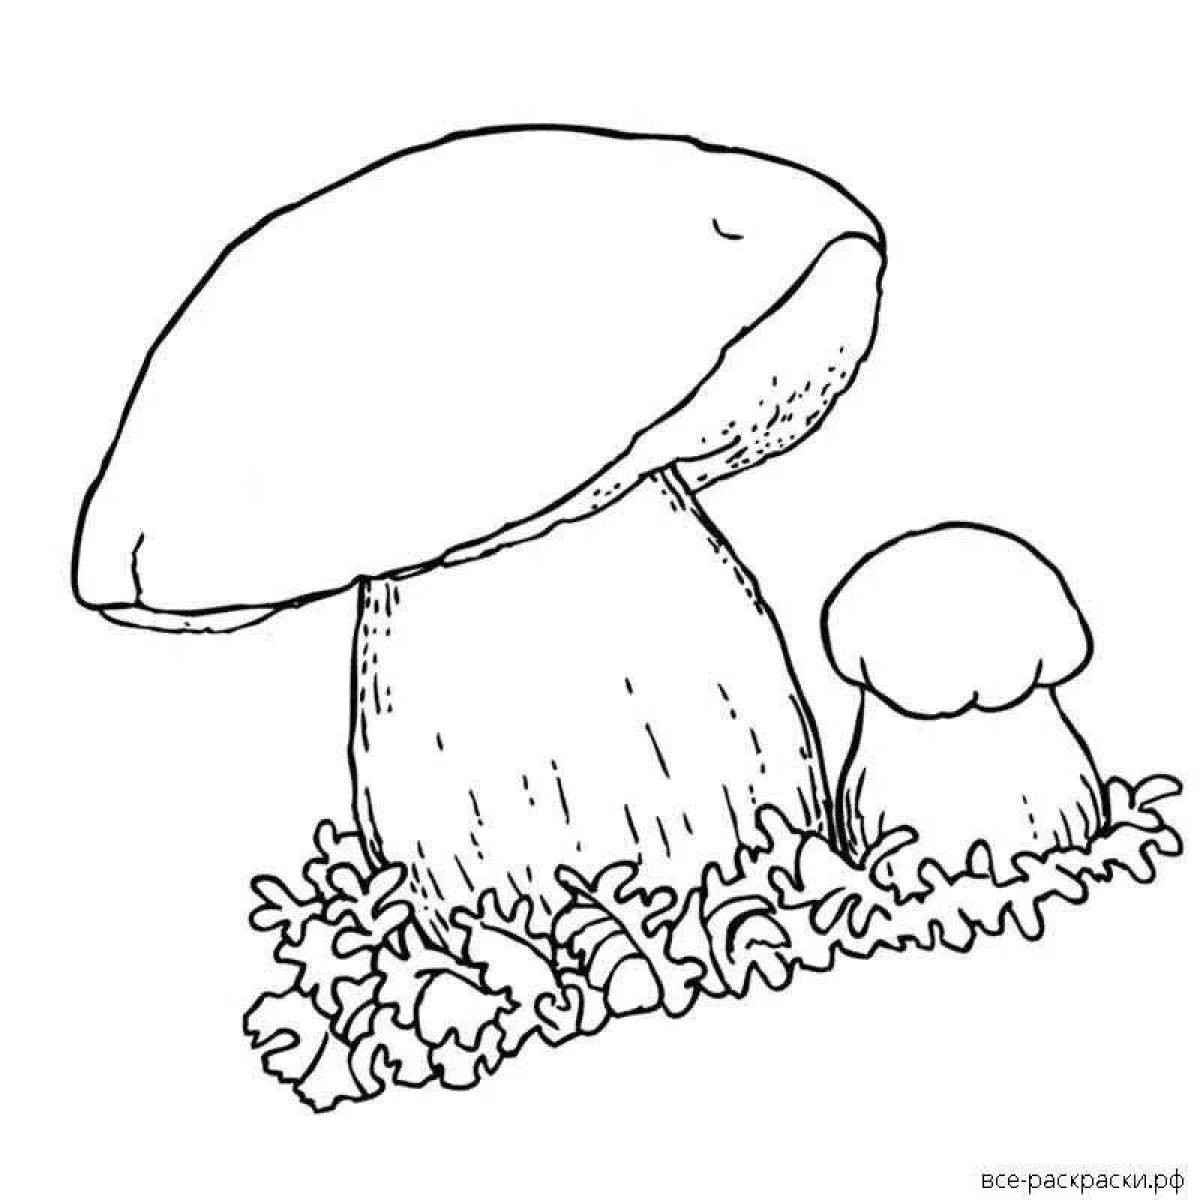 Glowing porcini mushrooms coloring page